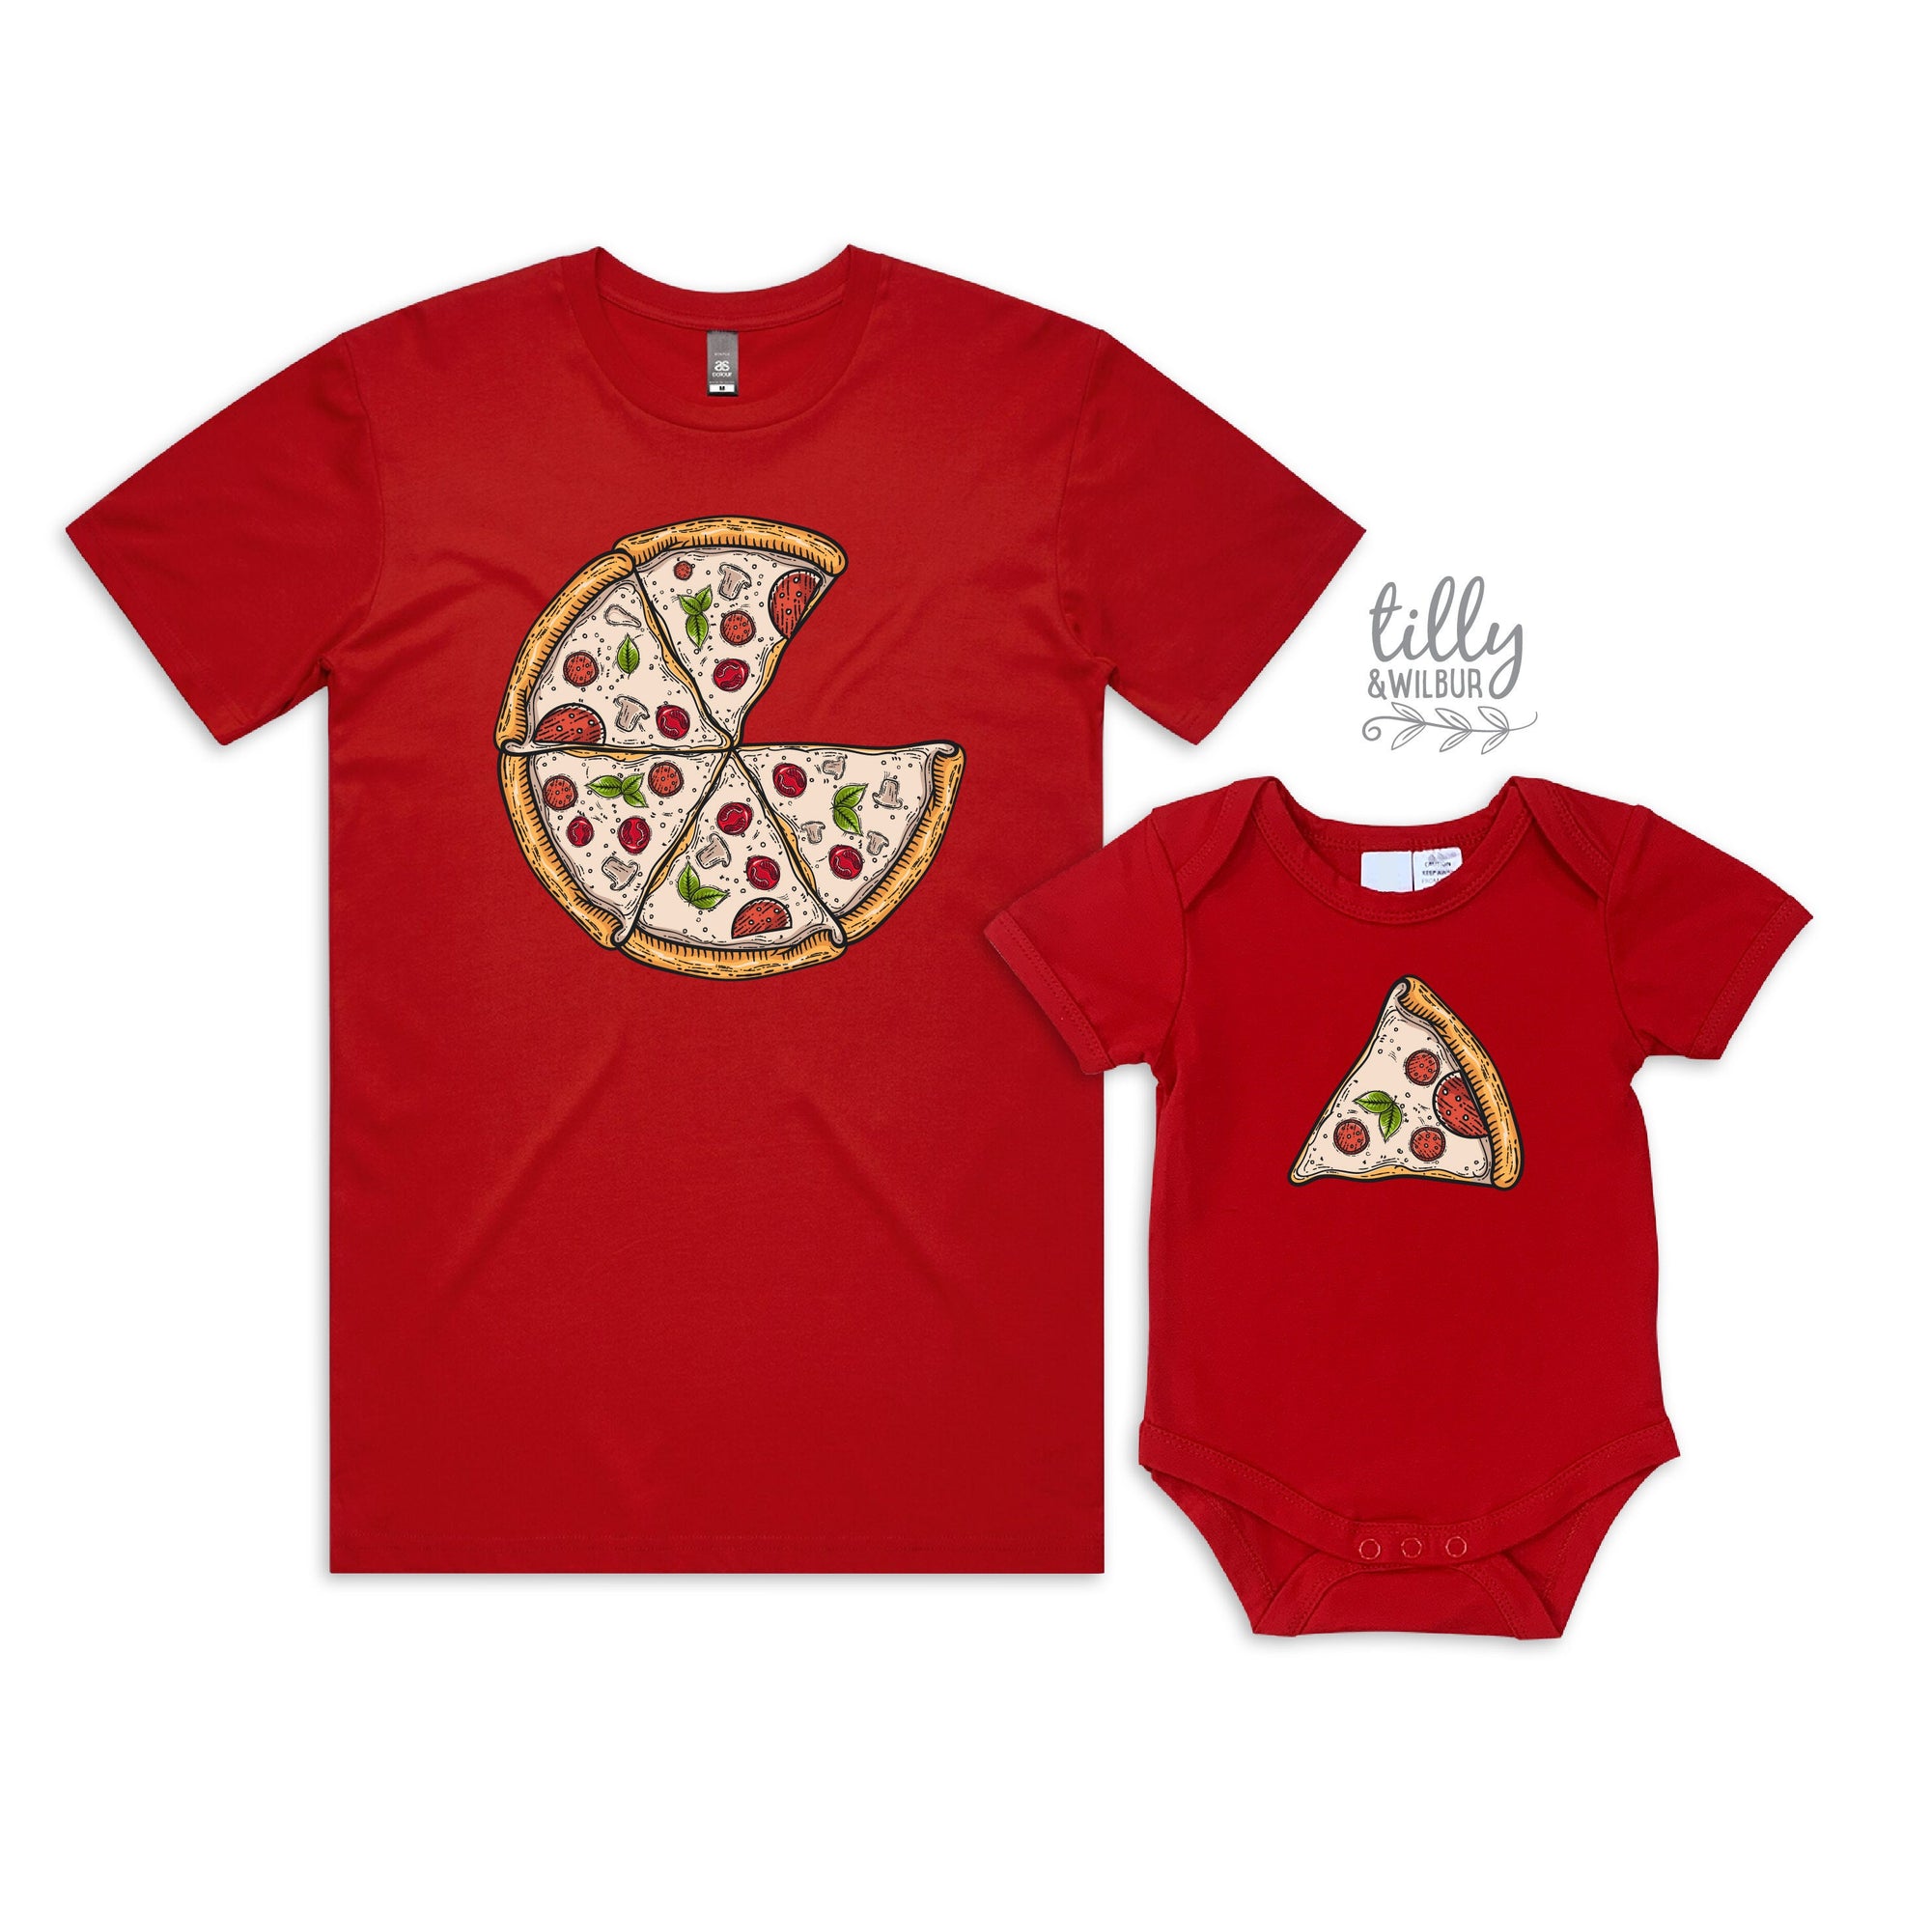 Matching Pizza Slice T-Shirts, Matching Pizza T-Shirts, Matching Family T-Shirts, Father Son, Daddy Daughter, Mother Daughter, Mother Son